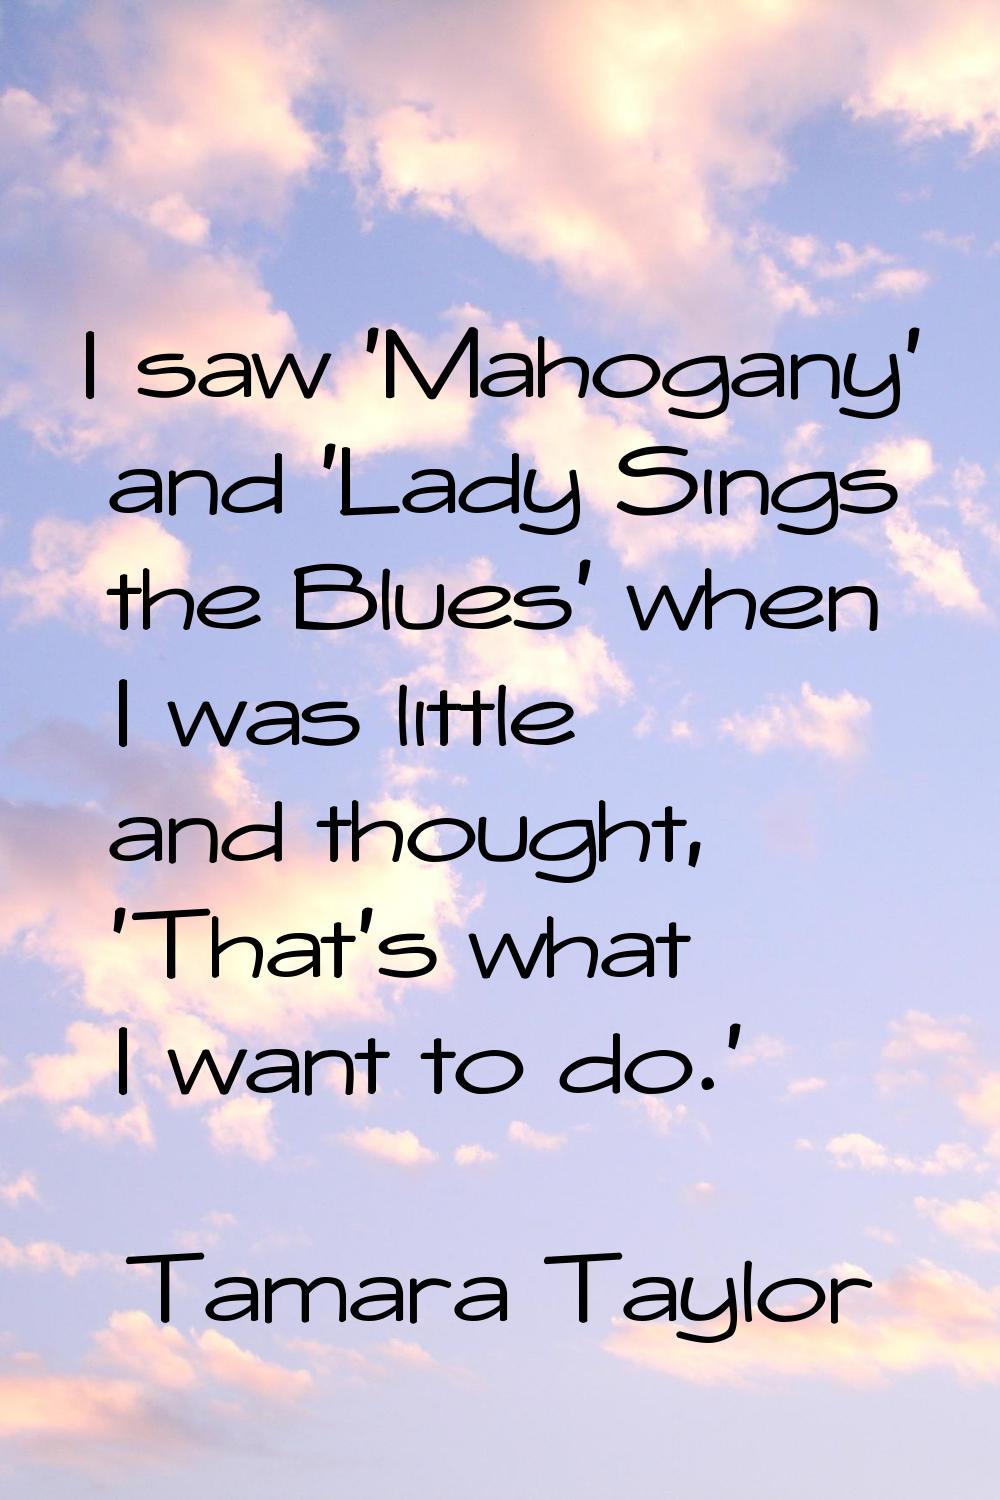 I saw 'Mahogany' and 'Lady Sings the Blues' when I was little and thought, 'That's what I want to d